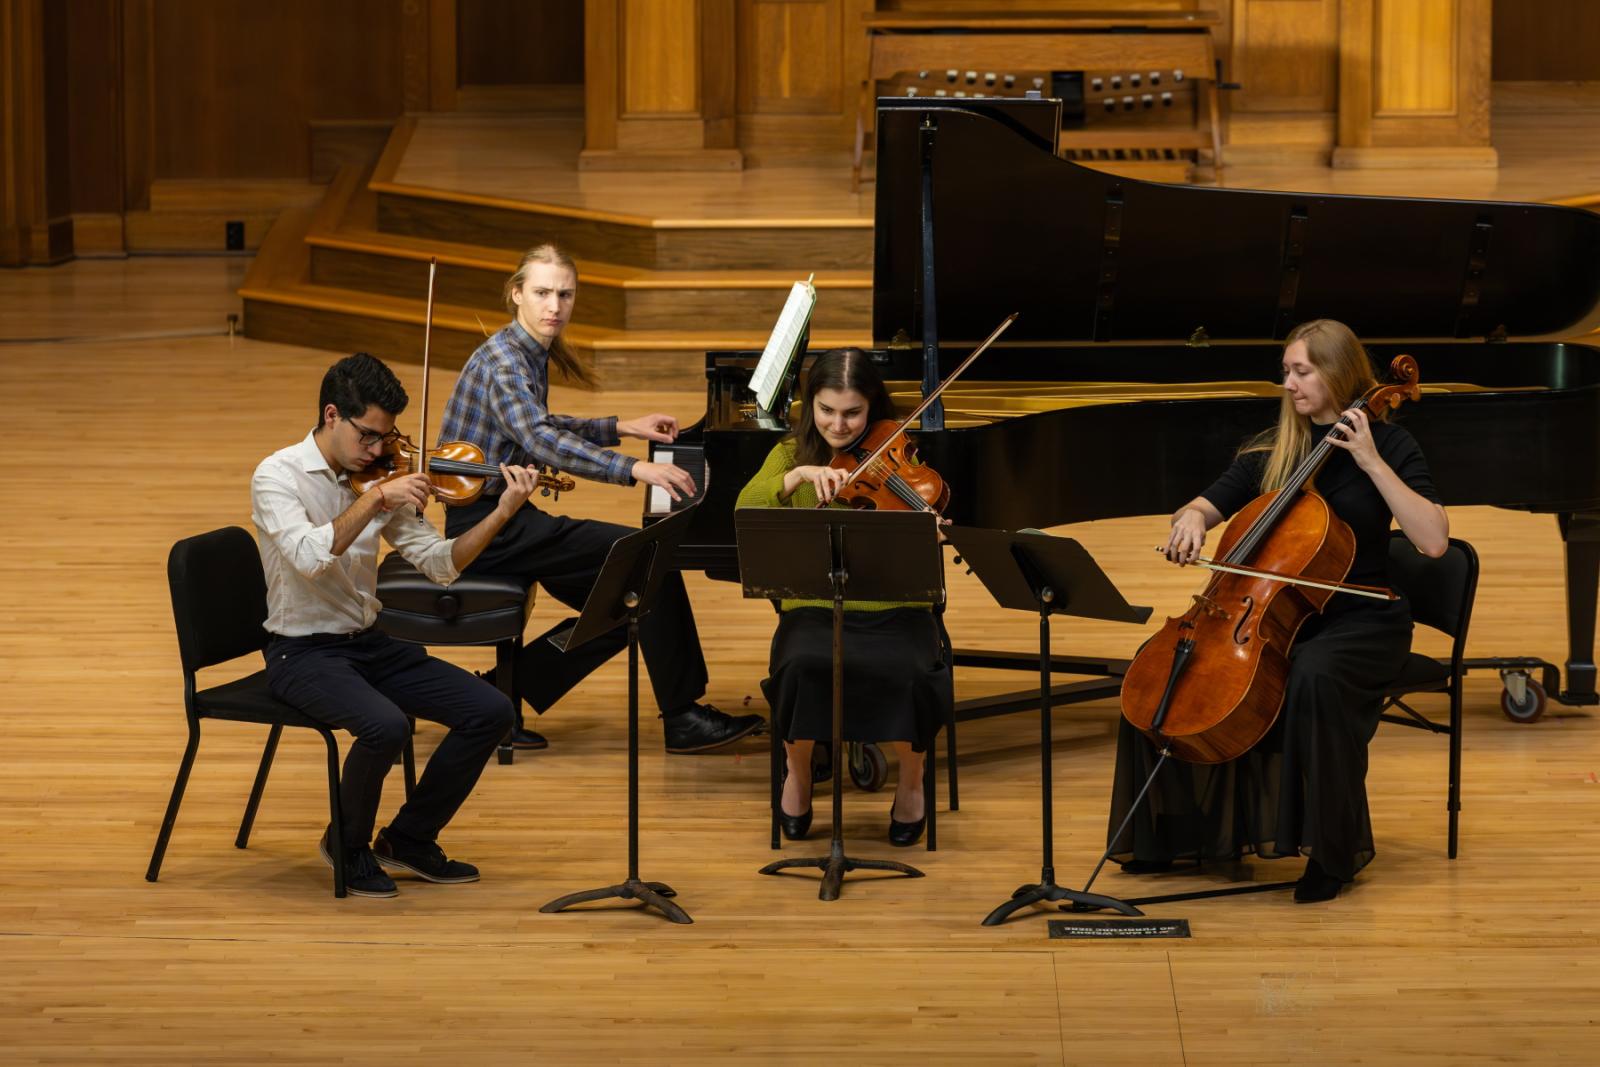 Lawrence University students perform chamber music in Memorial Chapel. (Photo by Danny Damiani)